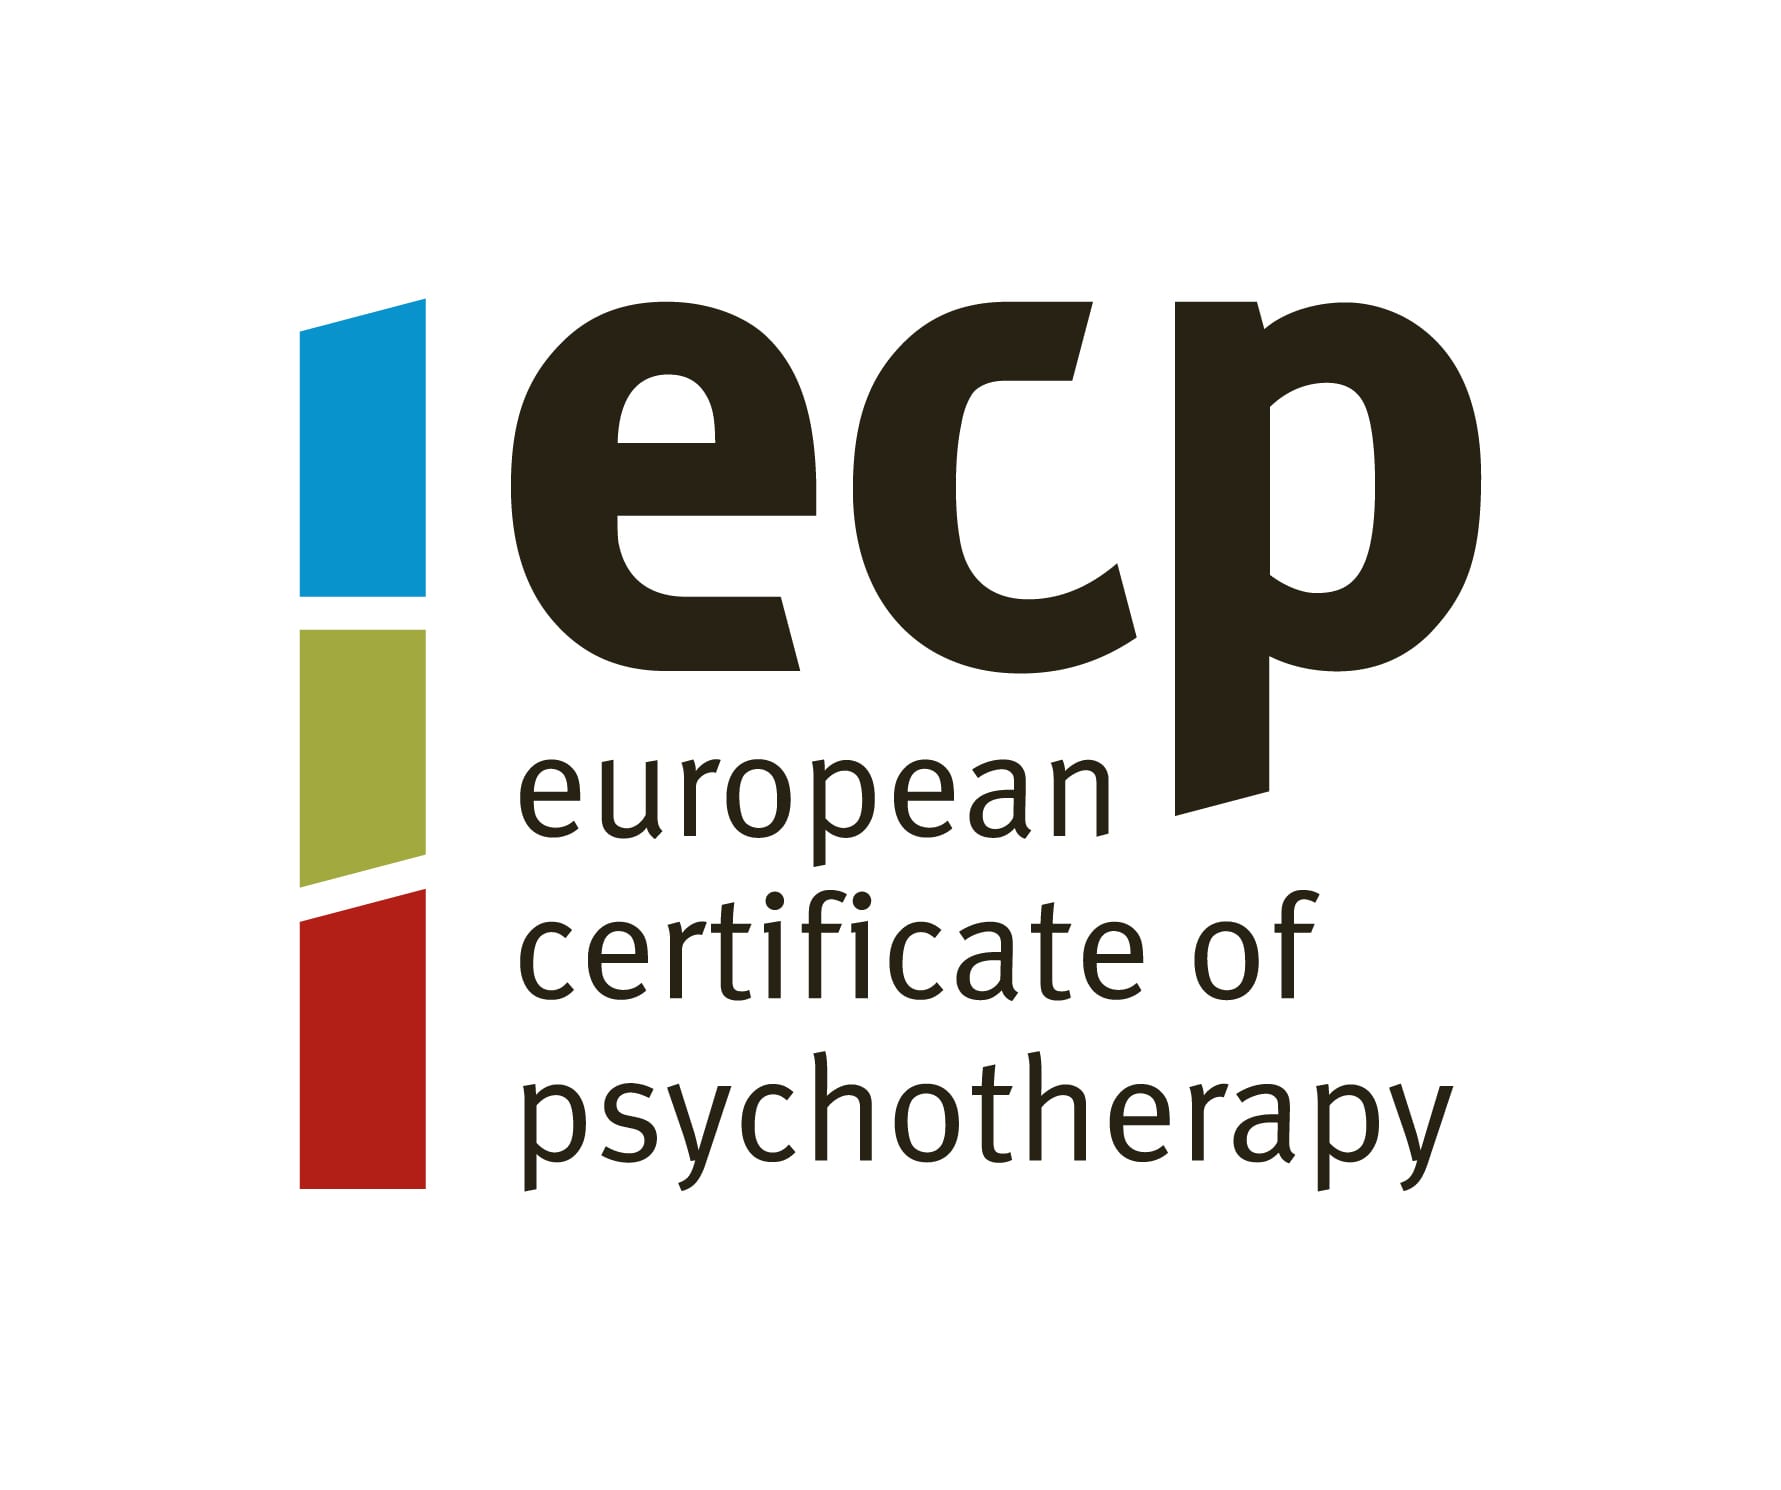 European Certificate of Psychotherapy